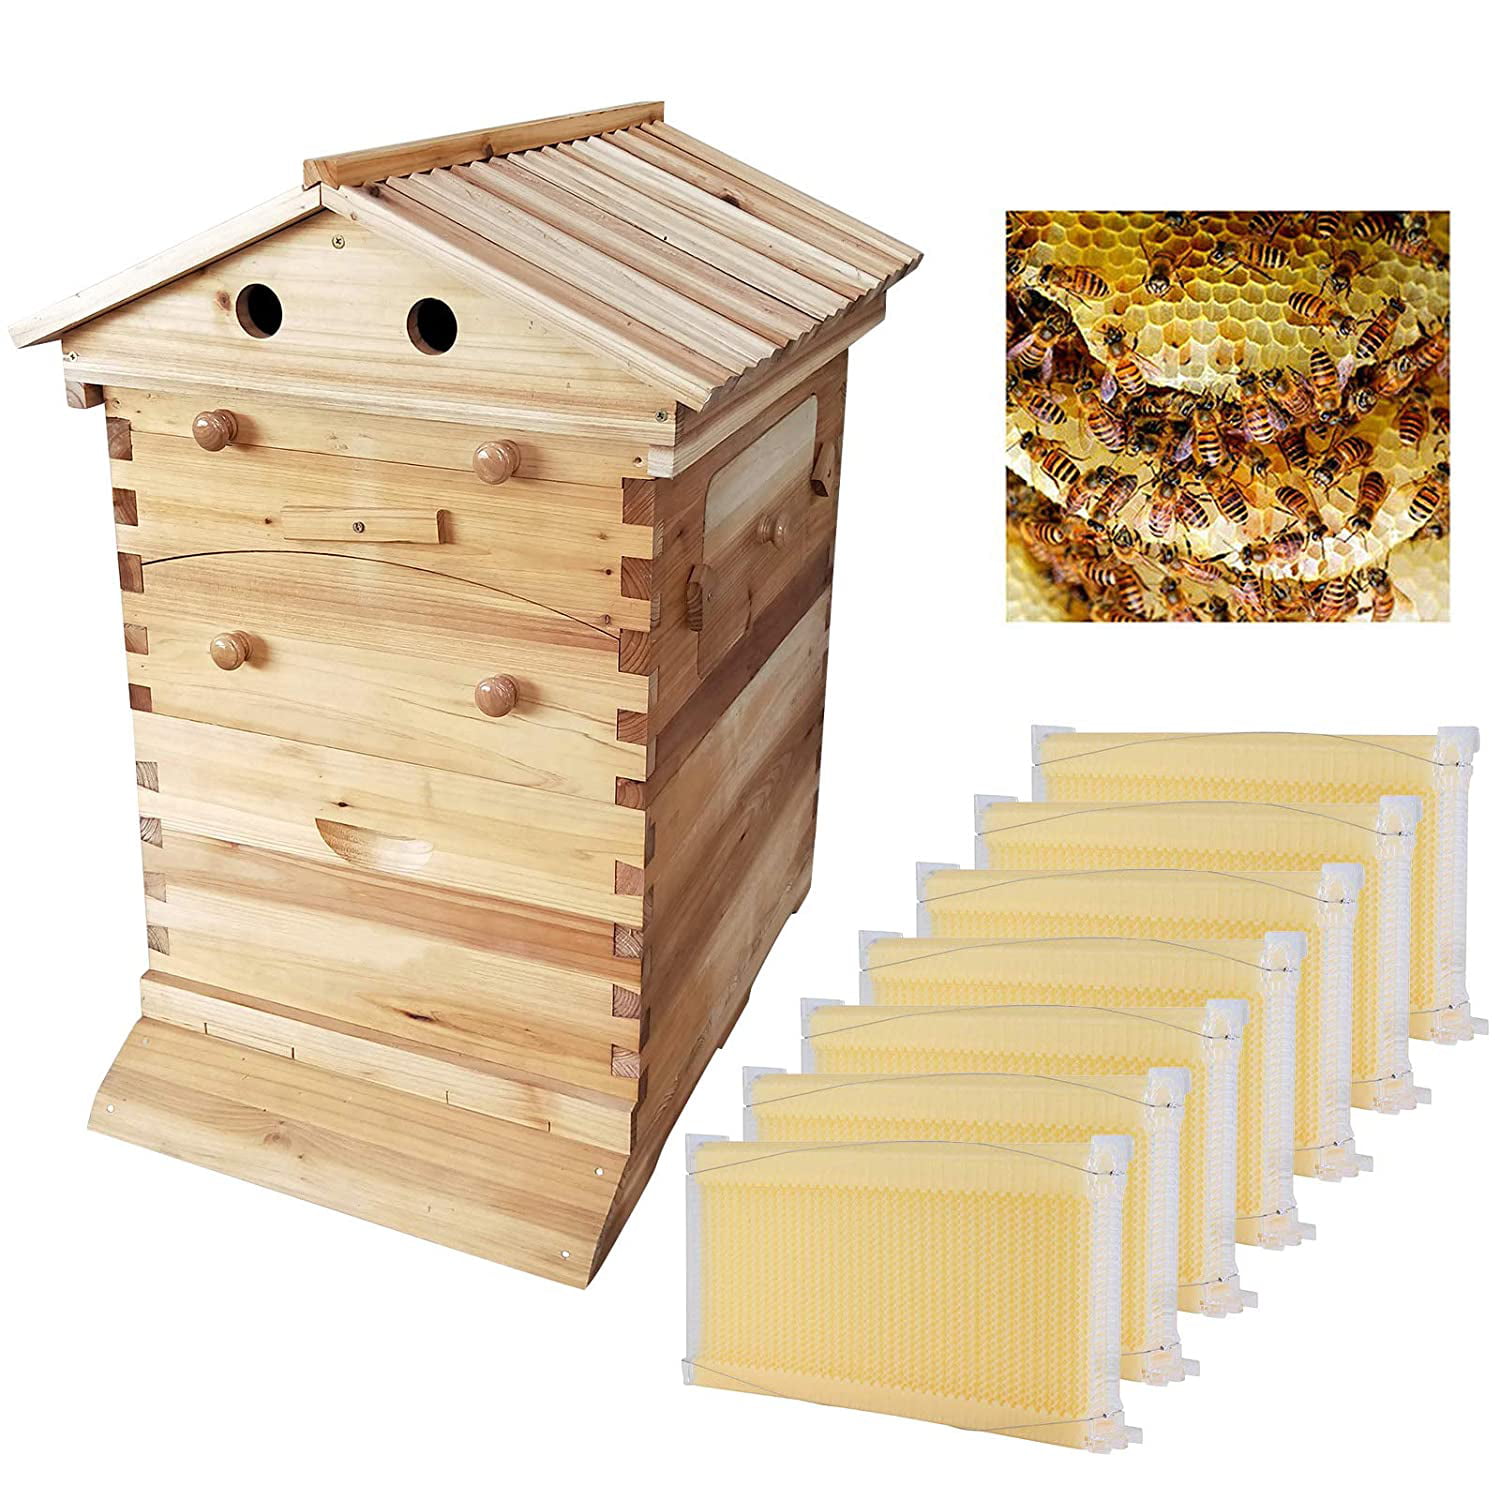 7PCS Upgraded Auto Run Bee Comb Hive Frames US 767853031925 Wooden Beekeeping Beehive House 